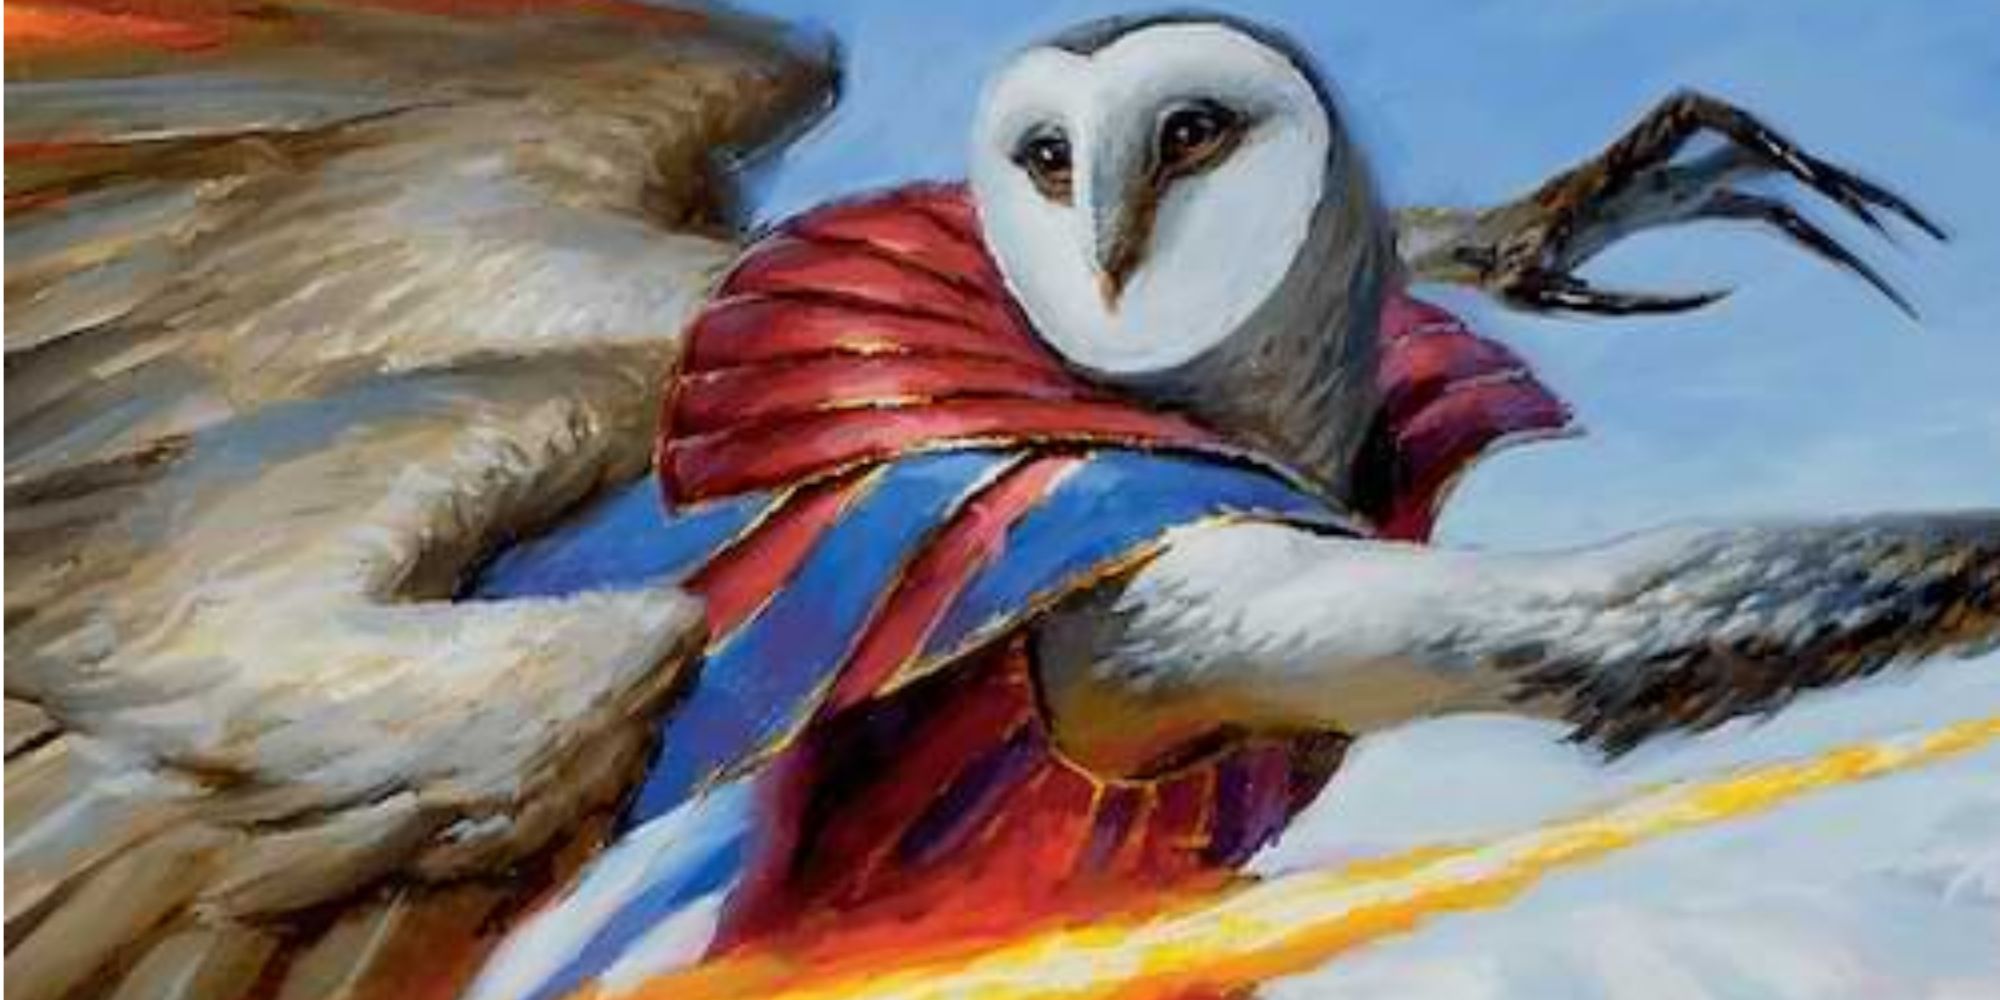 An Owlin, a playable species from Dungeons & Dragons